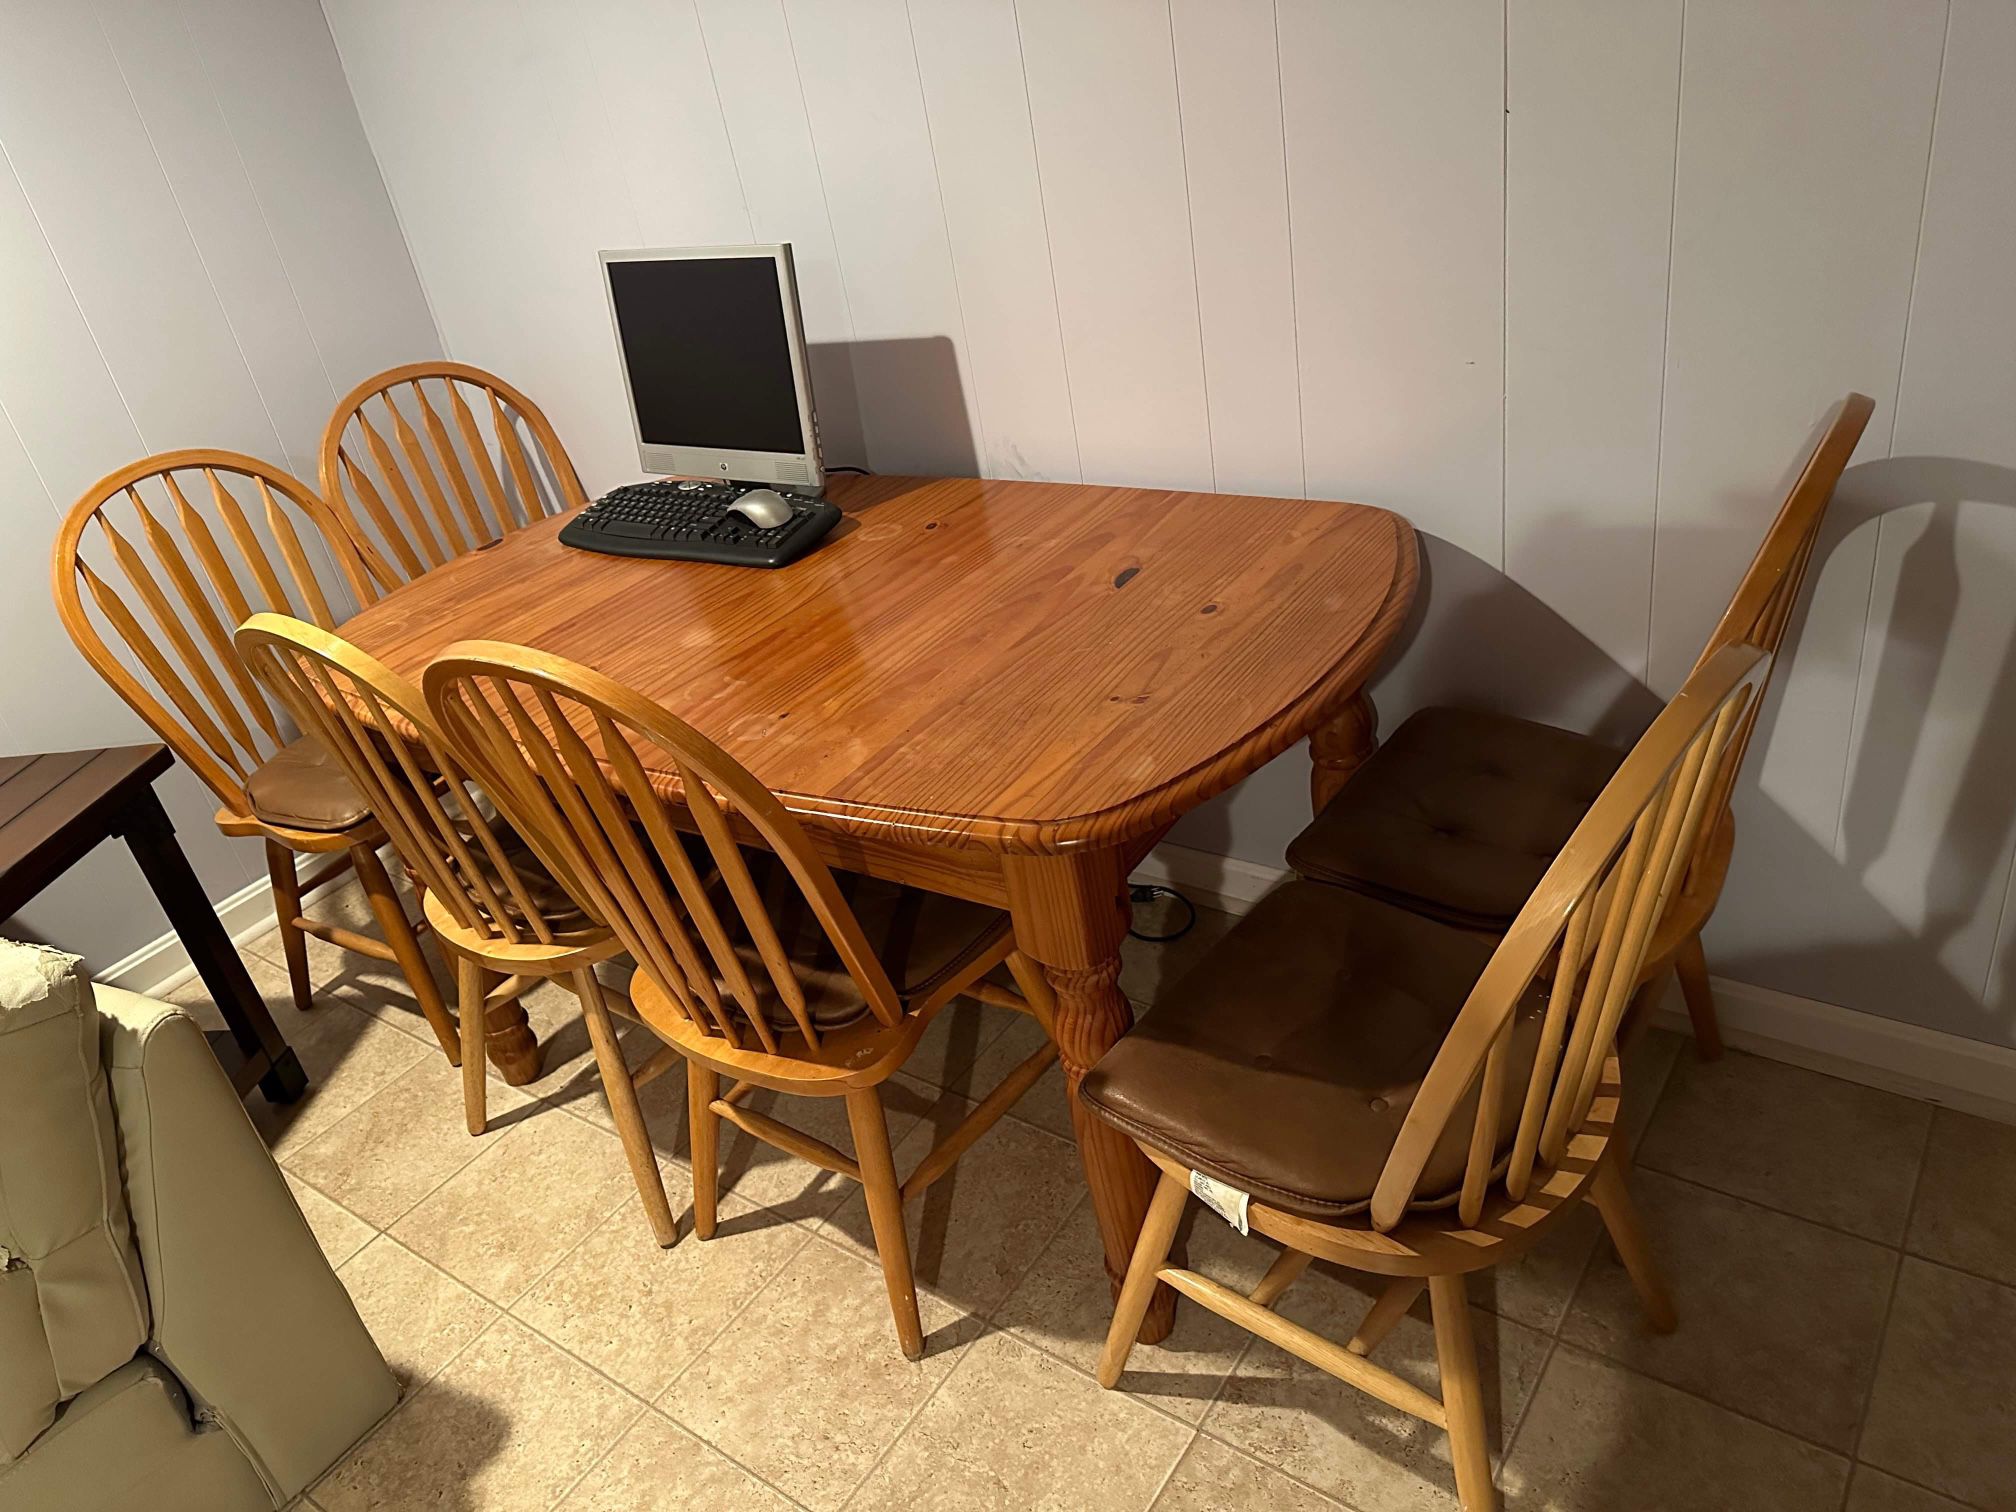 Free Dining Table &  Six Chairs W/ Cushions